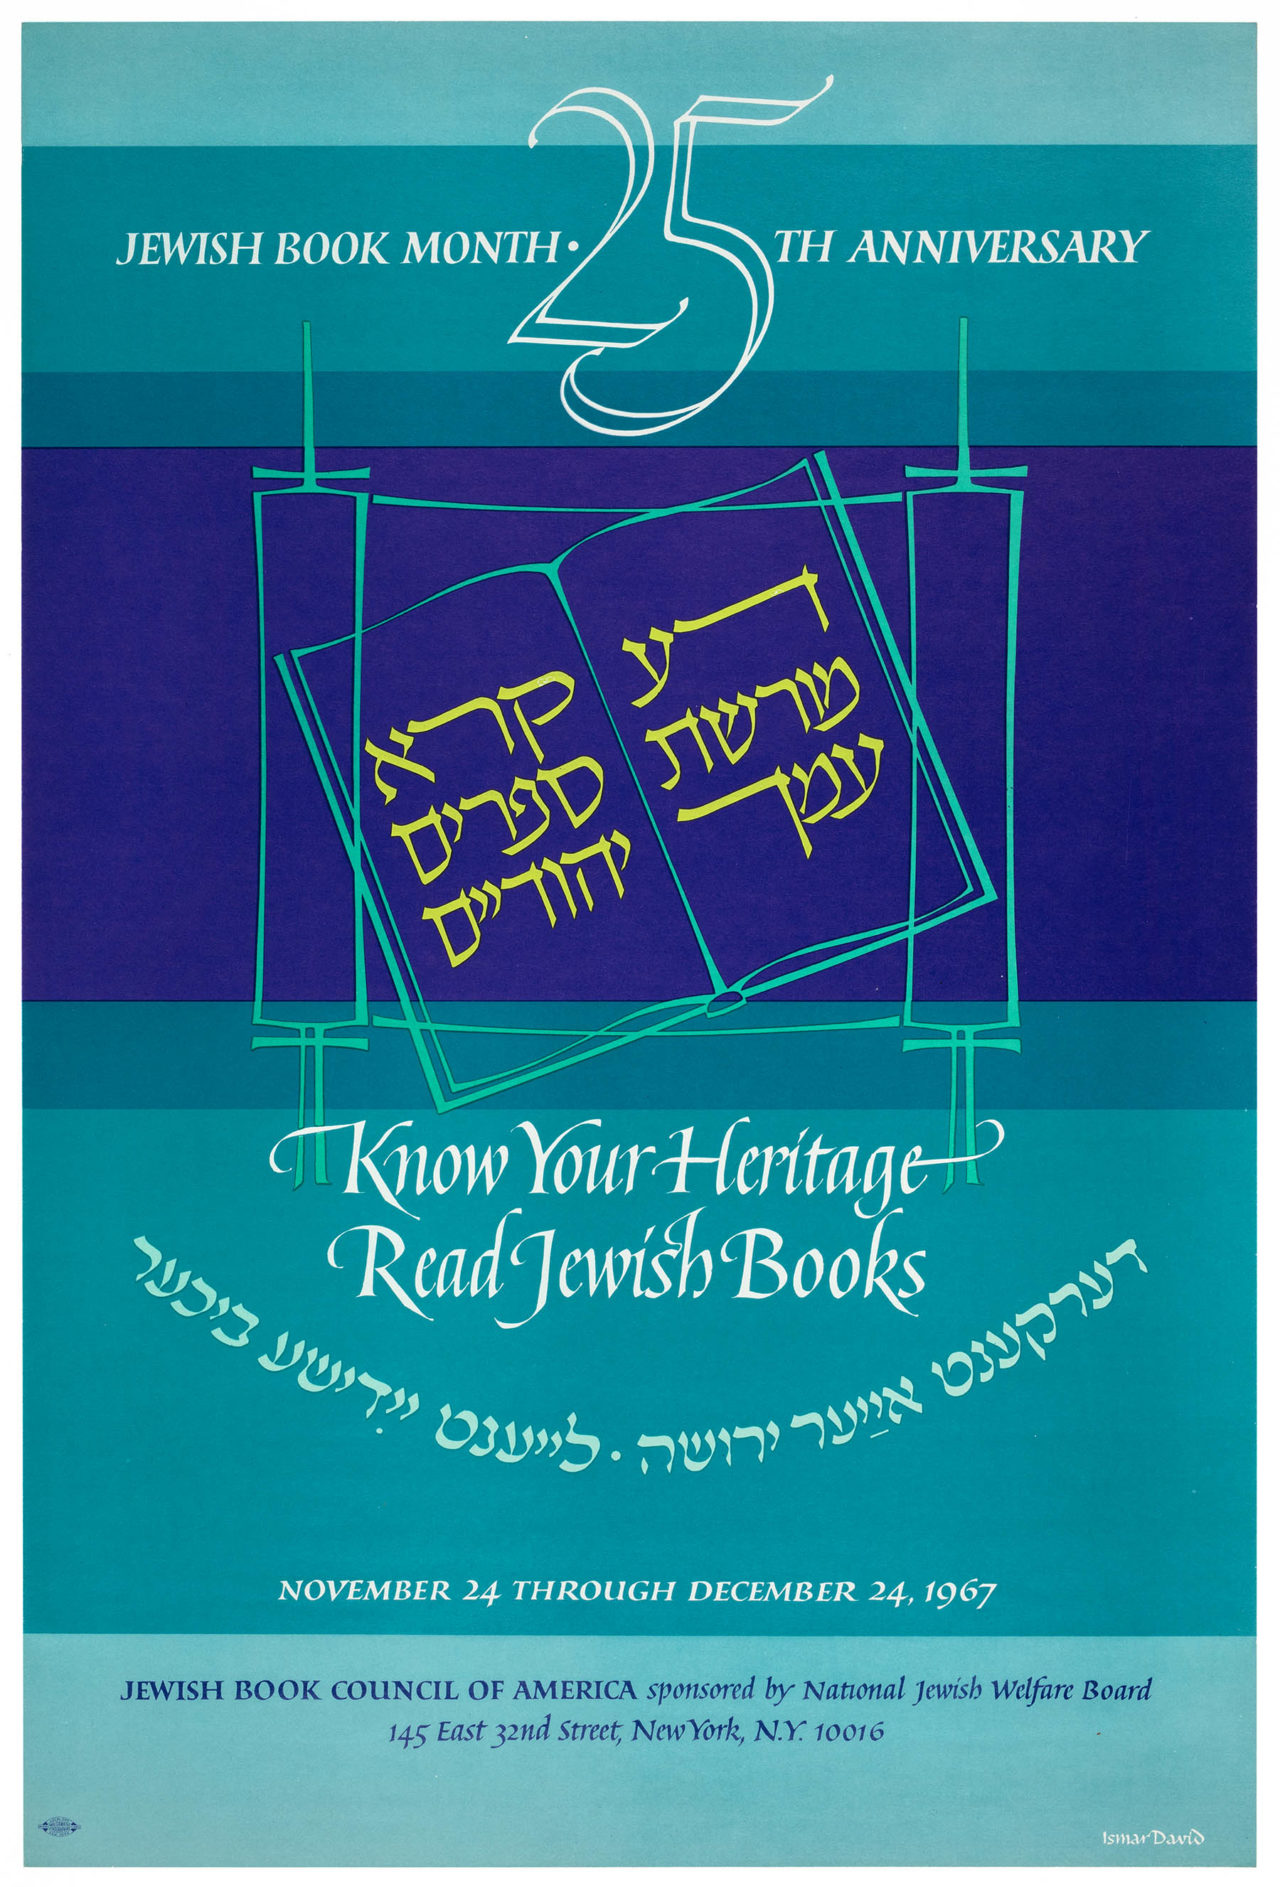 Jewish Book Month poster 1967